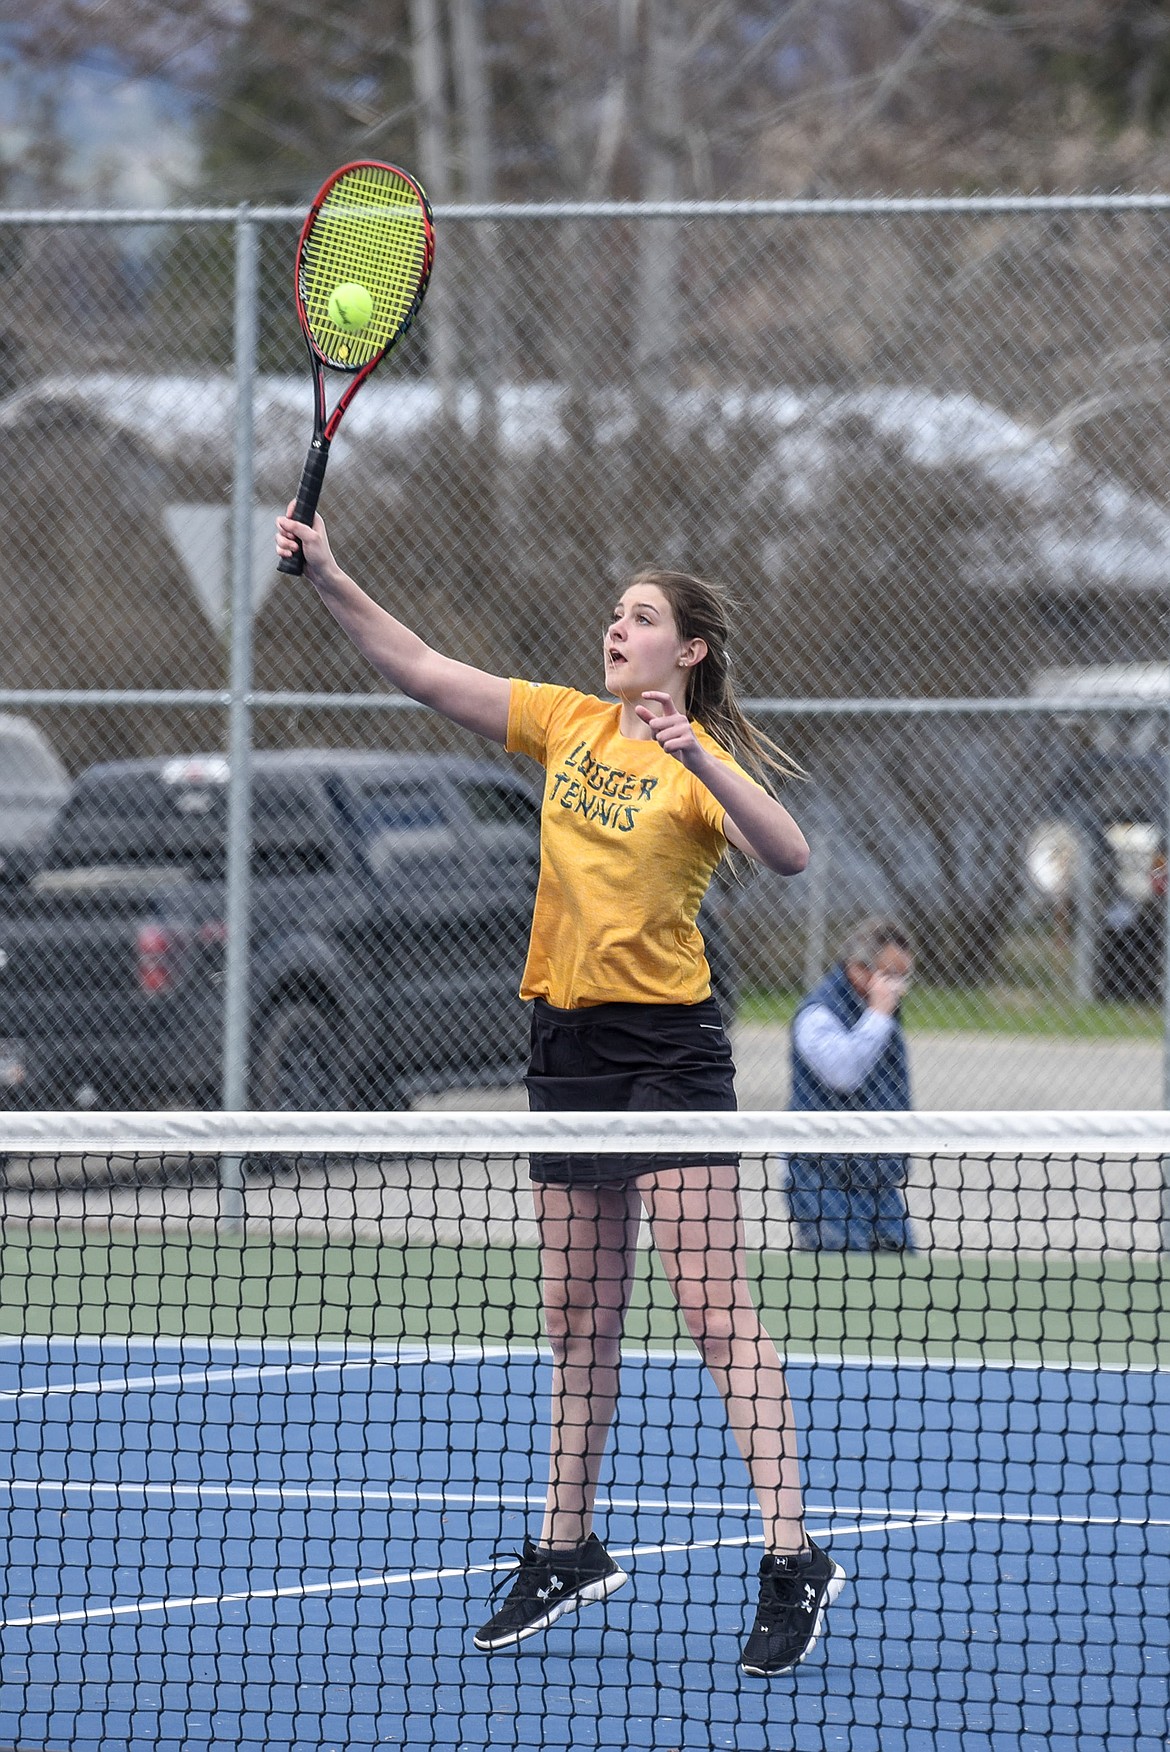 Libby sophomore Gabby Fantozzi reaches to make the return during a doubles match against Whitefish Tuesday at Libby. Fantozzi and her partner, sophomore Laneigha Zeiler, were undefeated against both Whitefish and Polson Tuesday. (Ben Kibbey/The Western News)